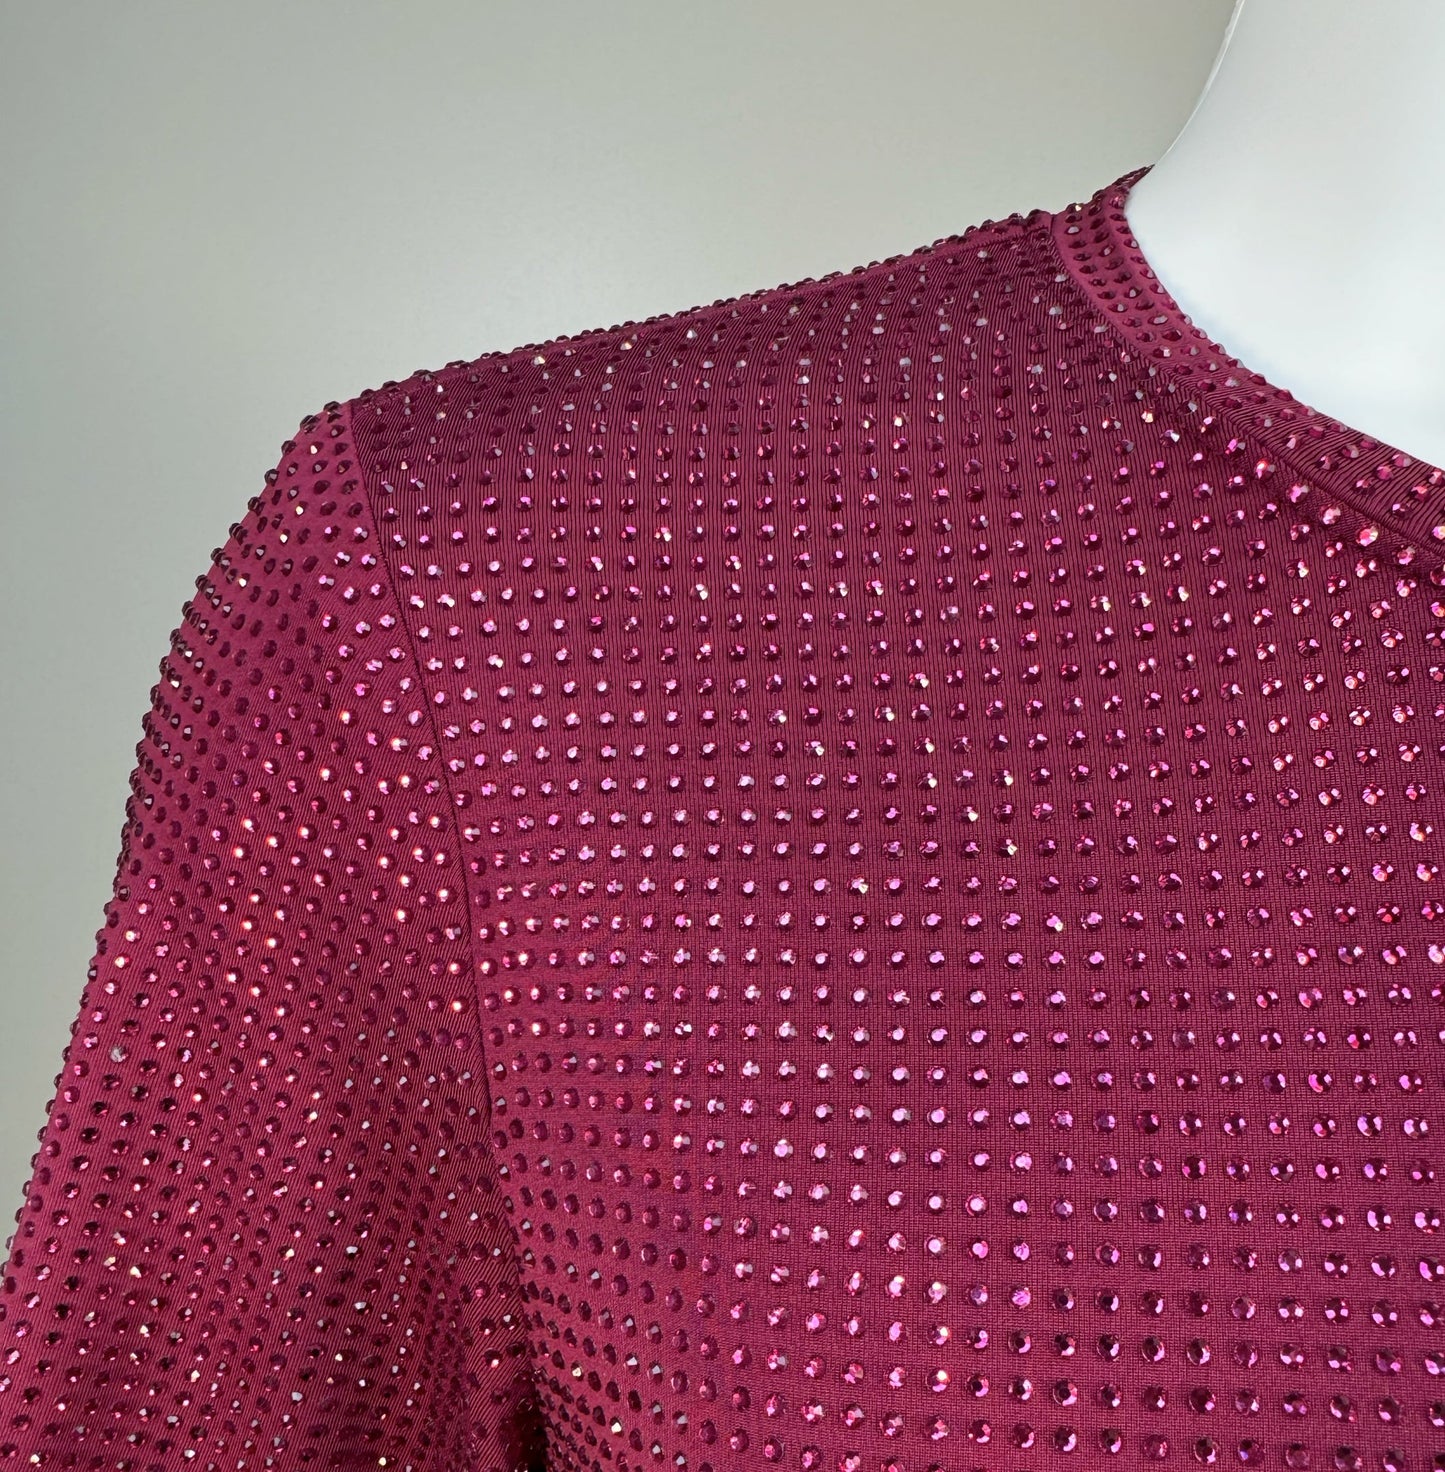 Shoulder detail of Purple Crystals on Purple Fabric T-shirt revealing the impeccable construction of this complex garment.